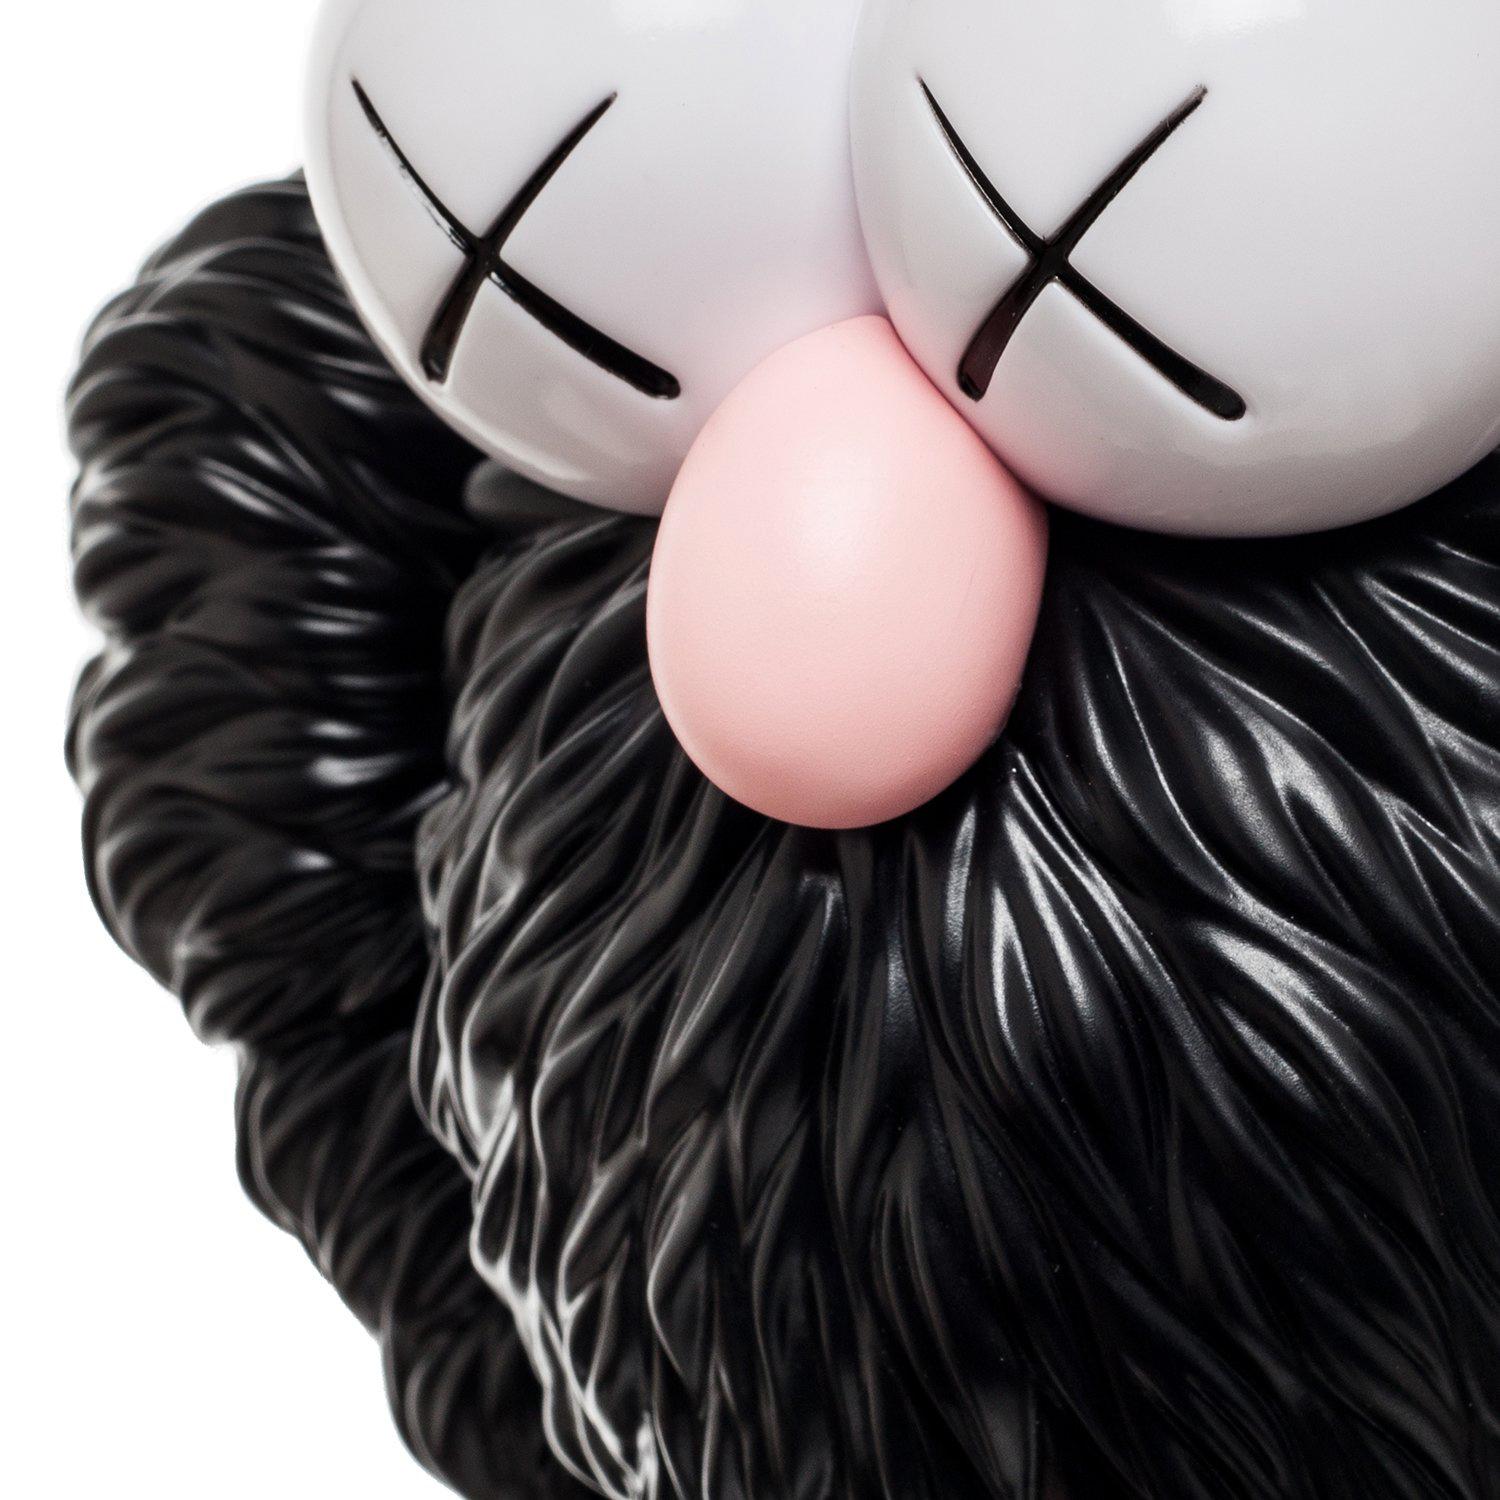 KAWS Black BFF new, unopened in its original packaging. 
A well-received work and variation of KAWS' large scale BFF sculpture is in Los Angeles's Playa Vista neighborhood. Completely sold out.

Medium: Vinyl Paint, Cast Resin.
13 x 5.7 x 3.25